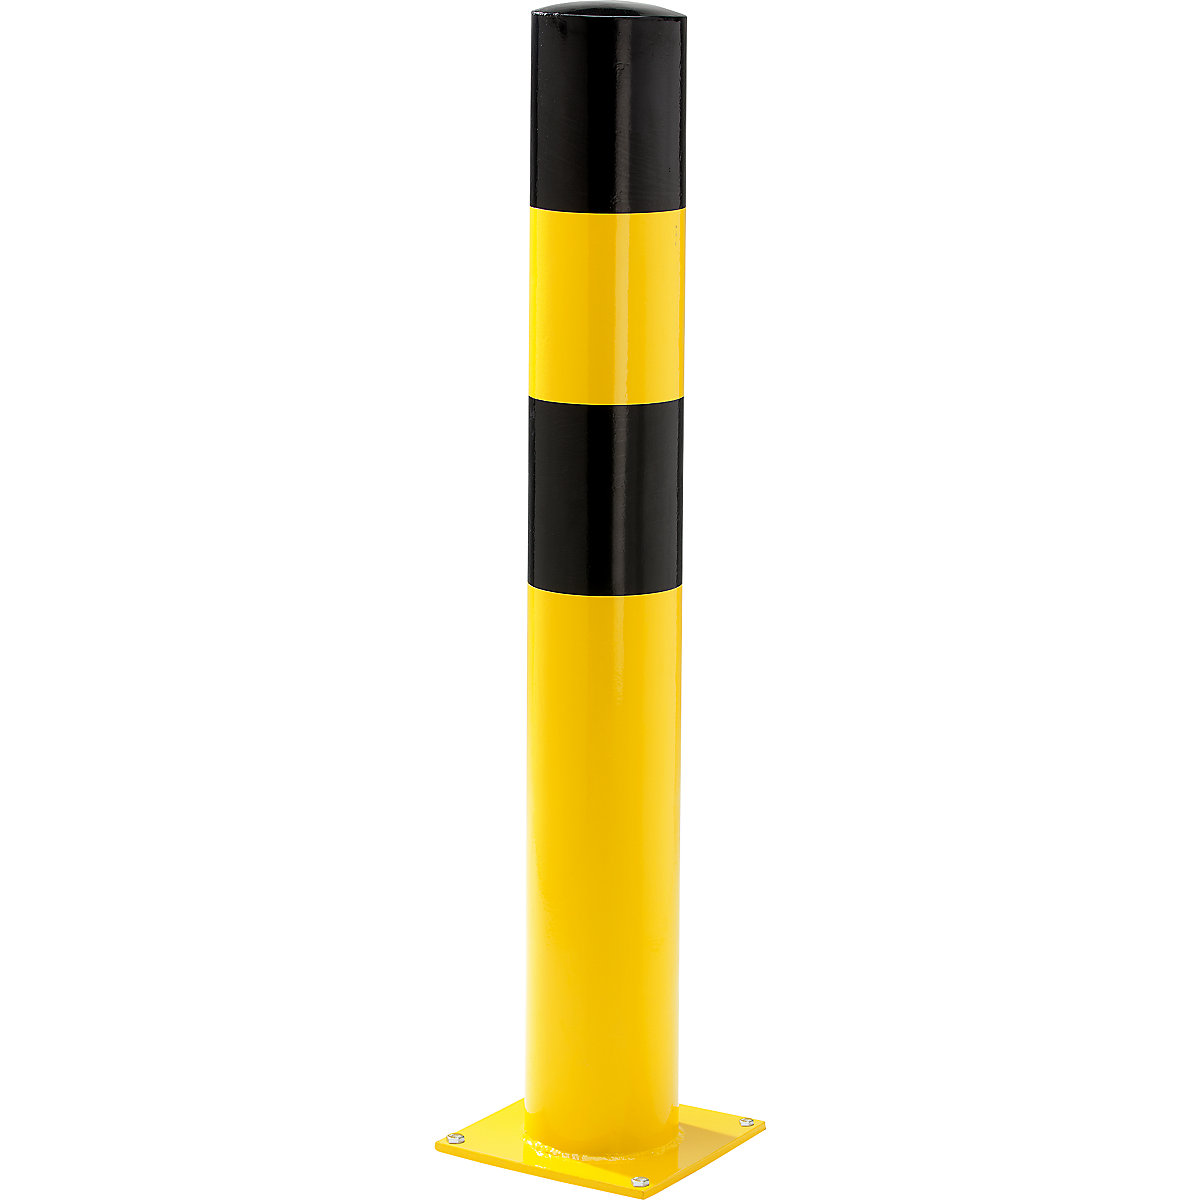 Crash protection bollard, Ø 159 mm, wall thickness 4.5 mm, for bolting in place, base plate 250 x 250 mm-1